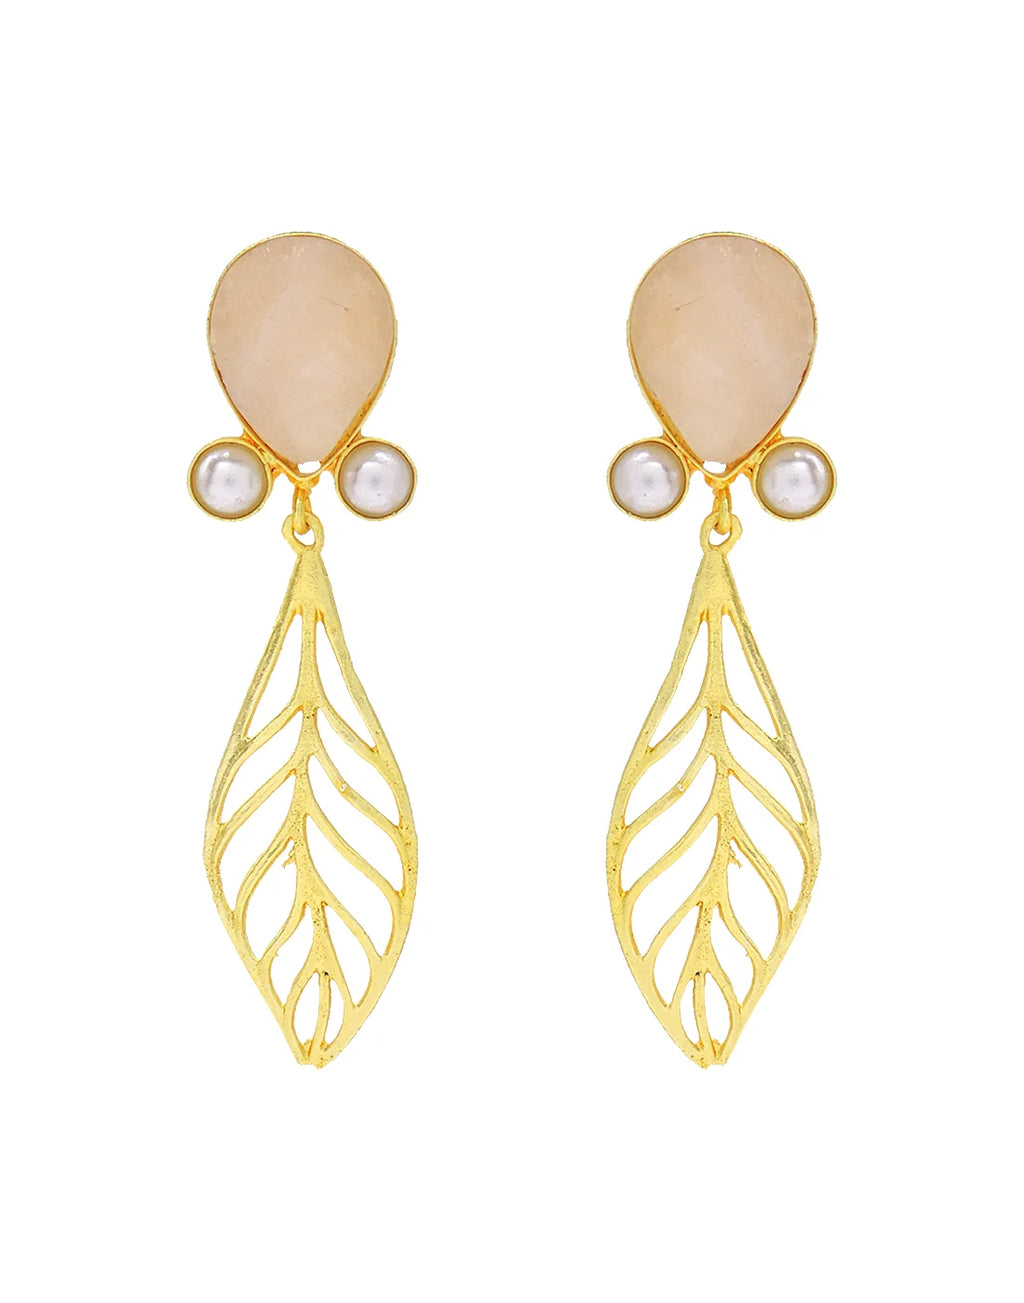 Rose Leaf Earrings- Handcrafted Jewellery from Dori